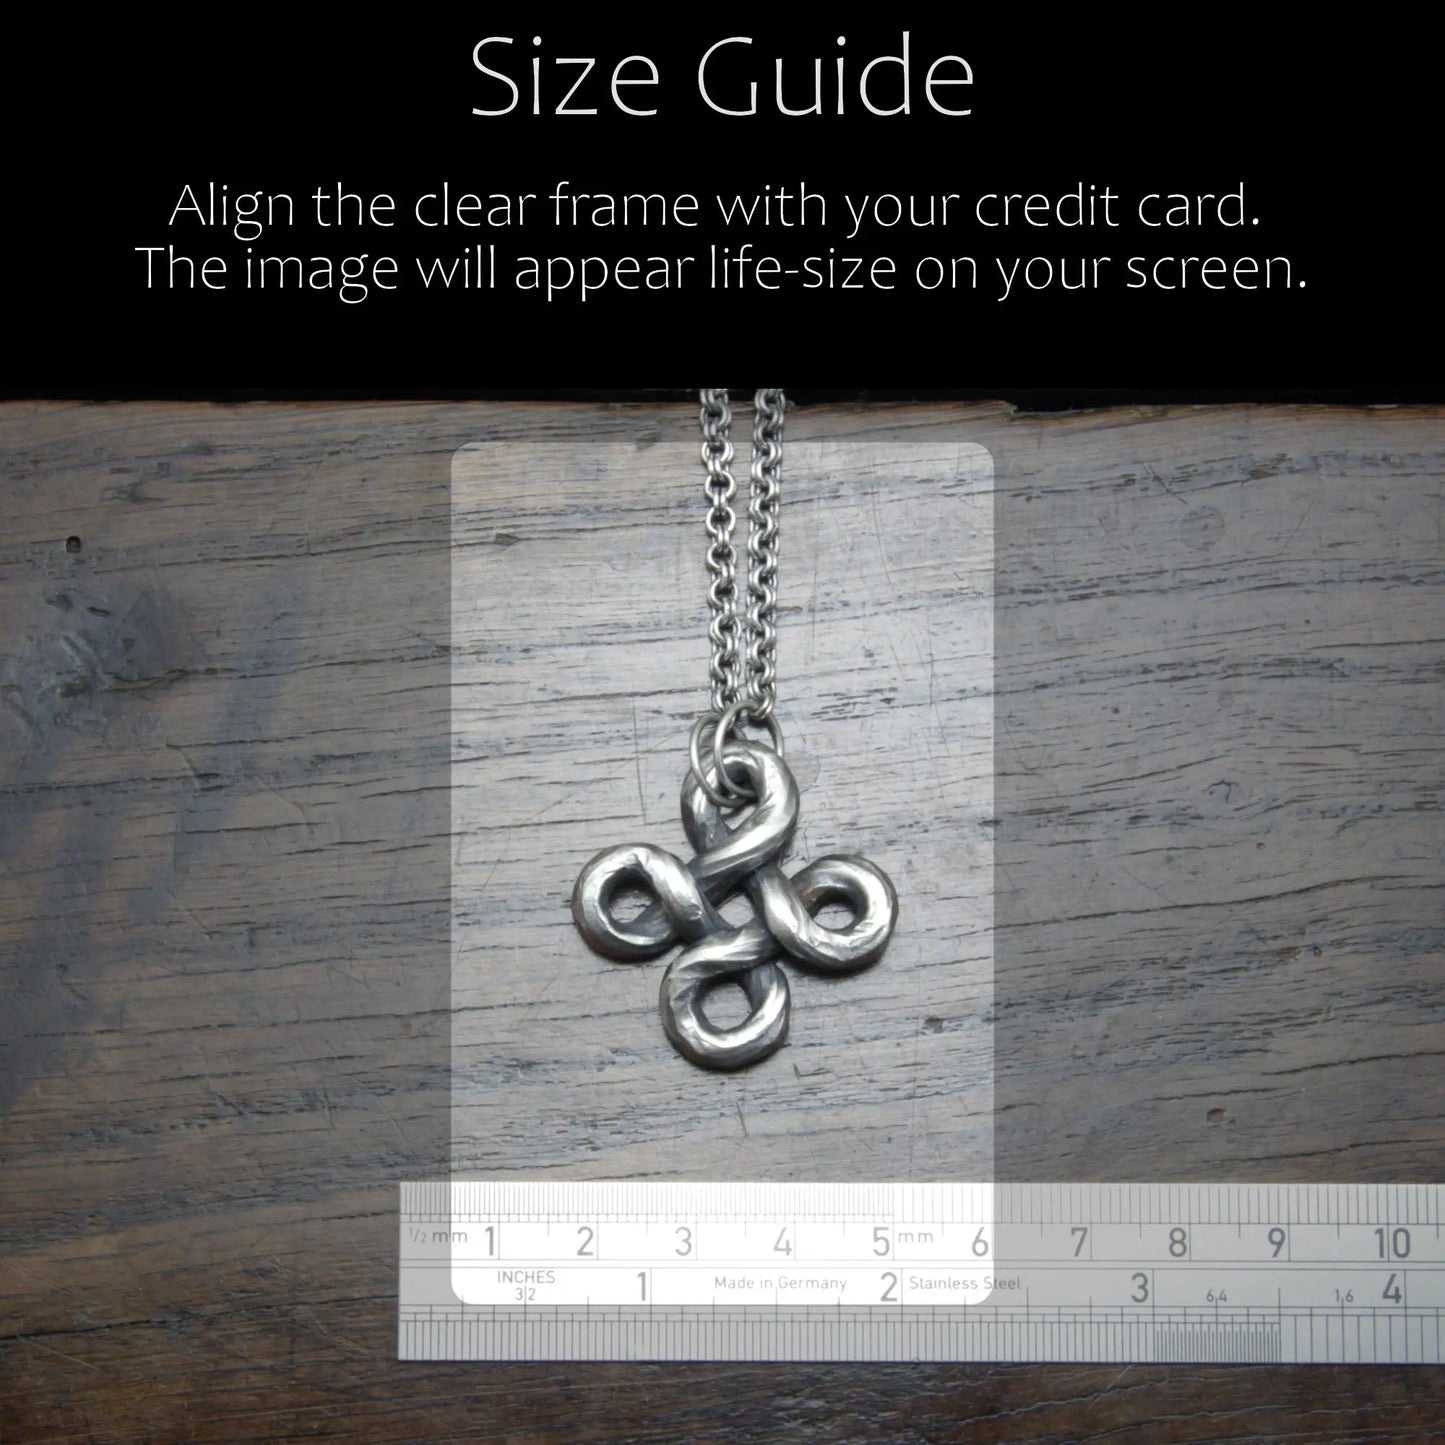 Size Guide. Align the clear frame with your credit card.  The image will appear life-size on your screen.